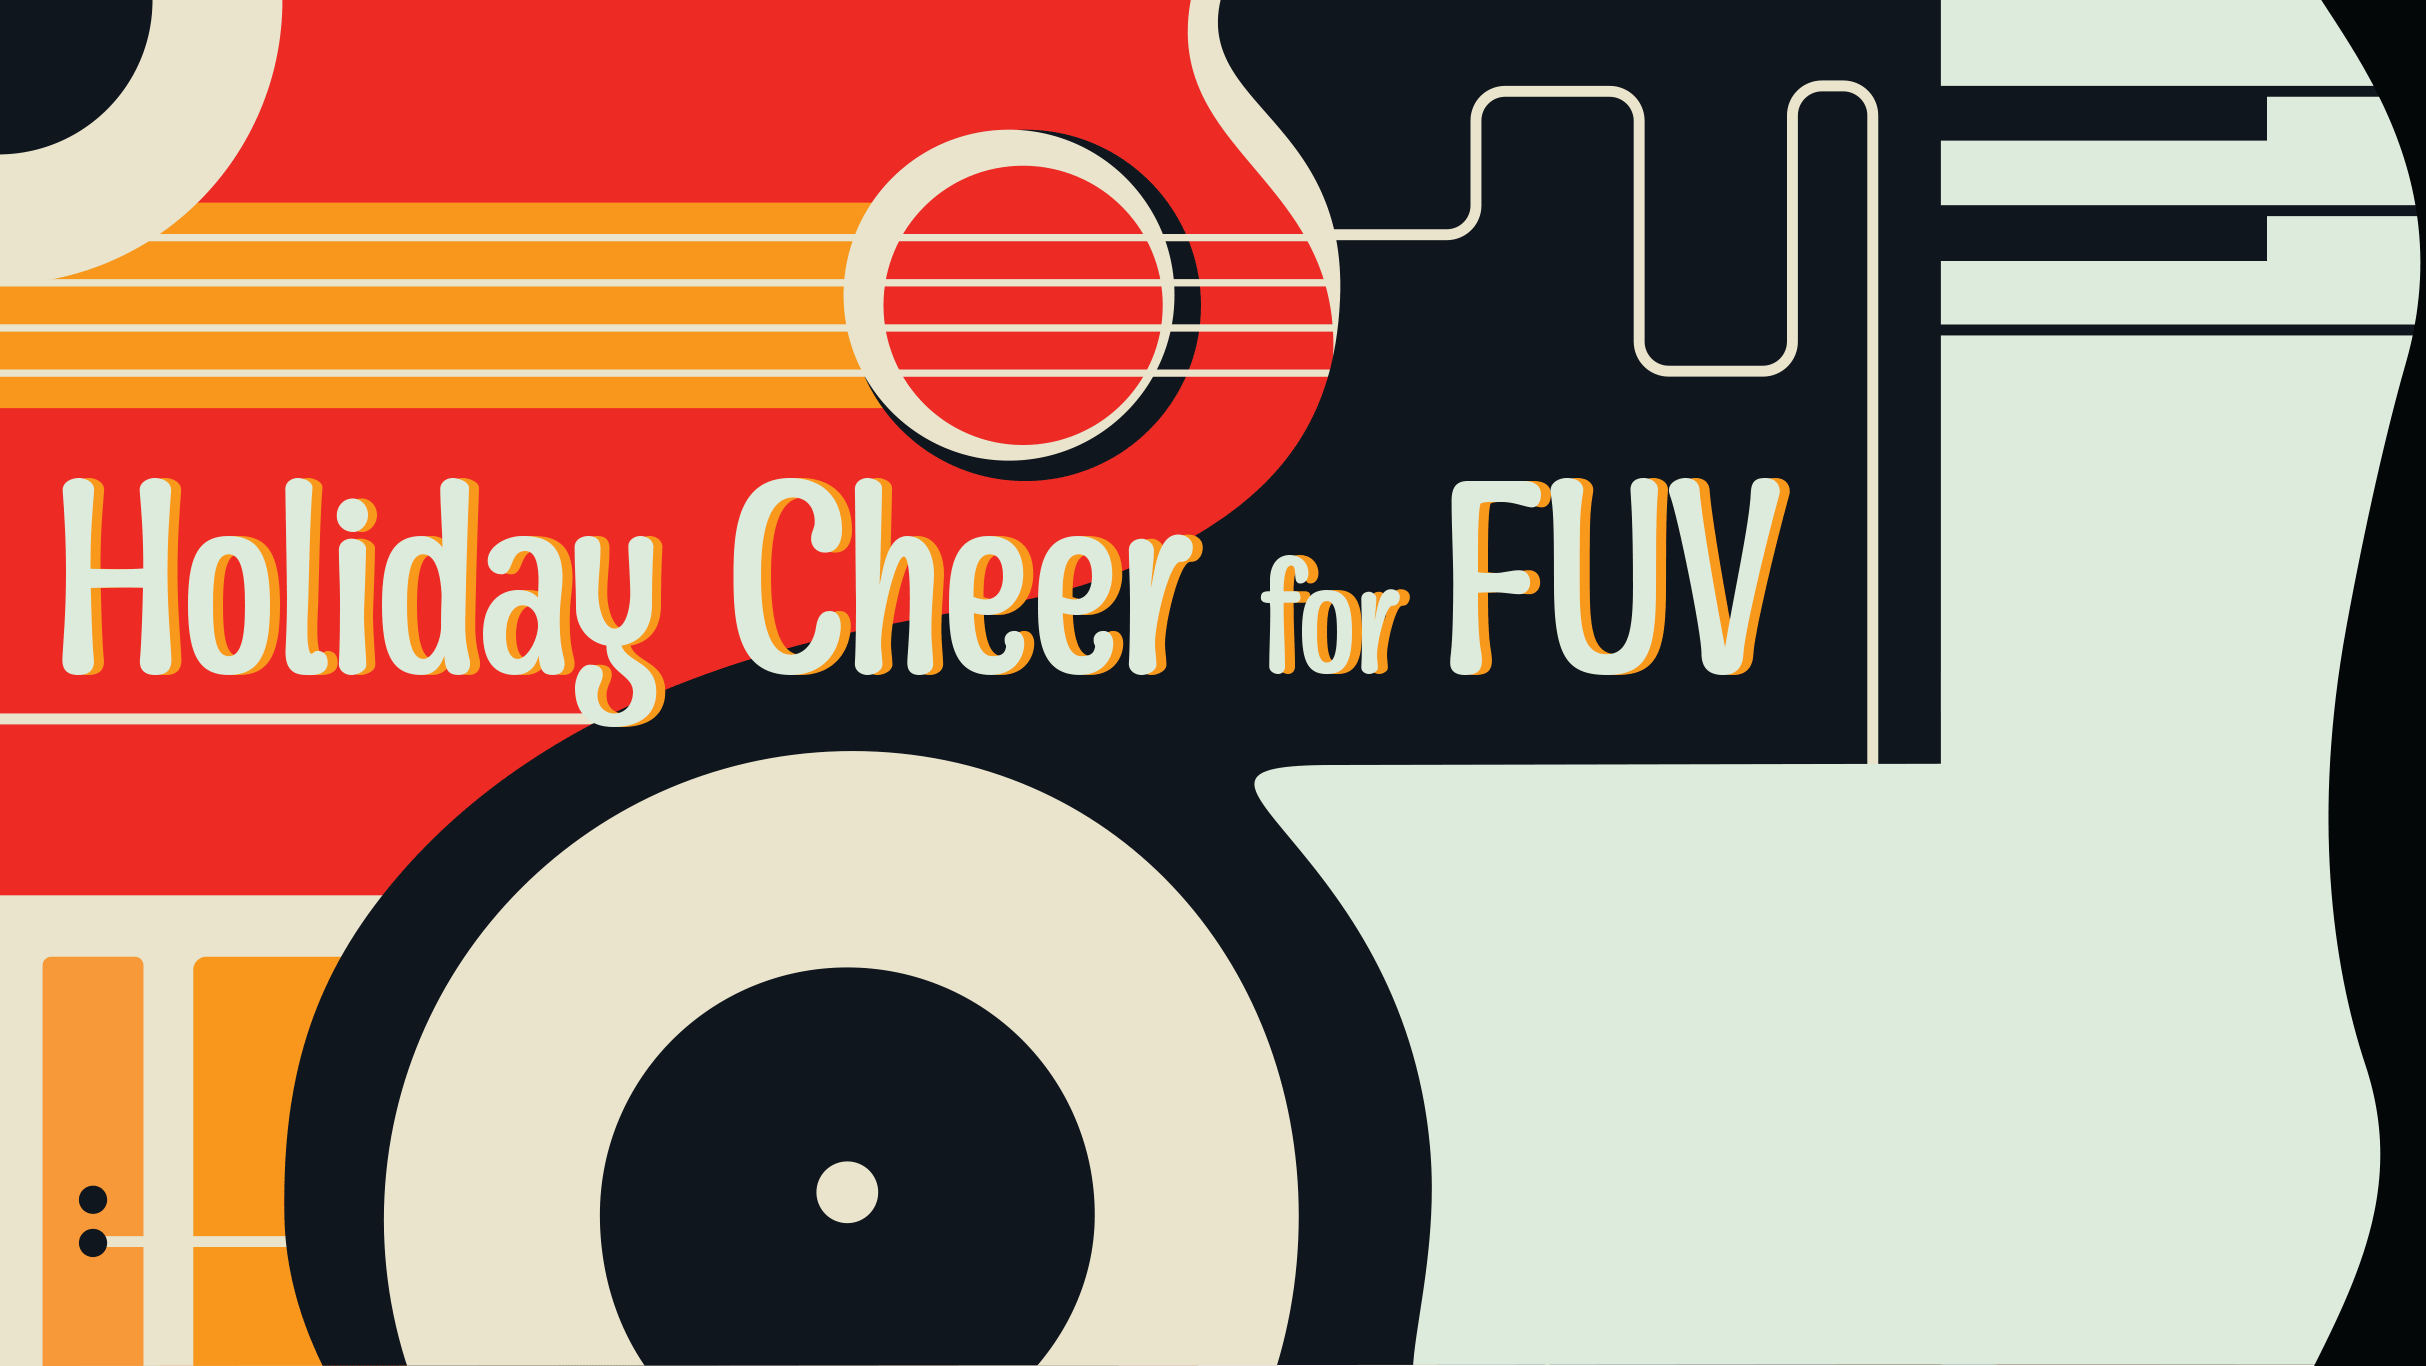 Holiday Cheer for FUV presale passcode for approved tickets in New York